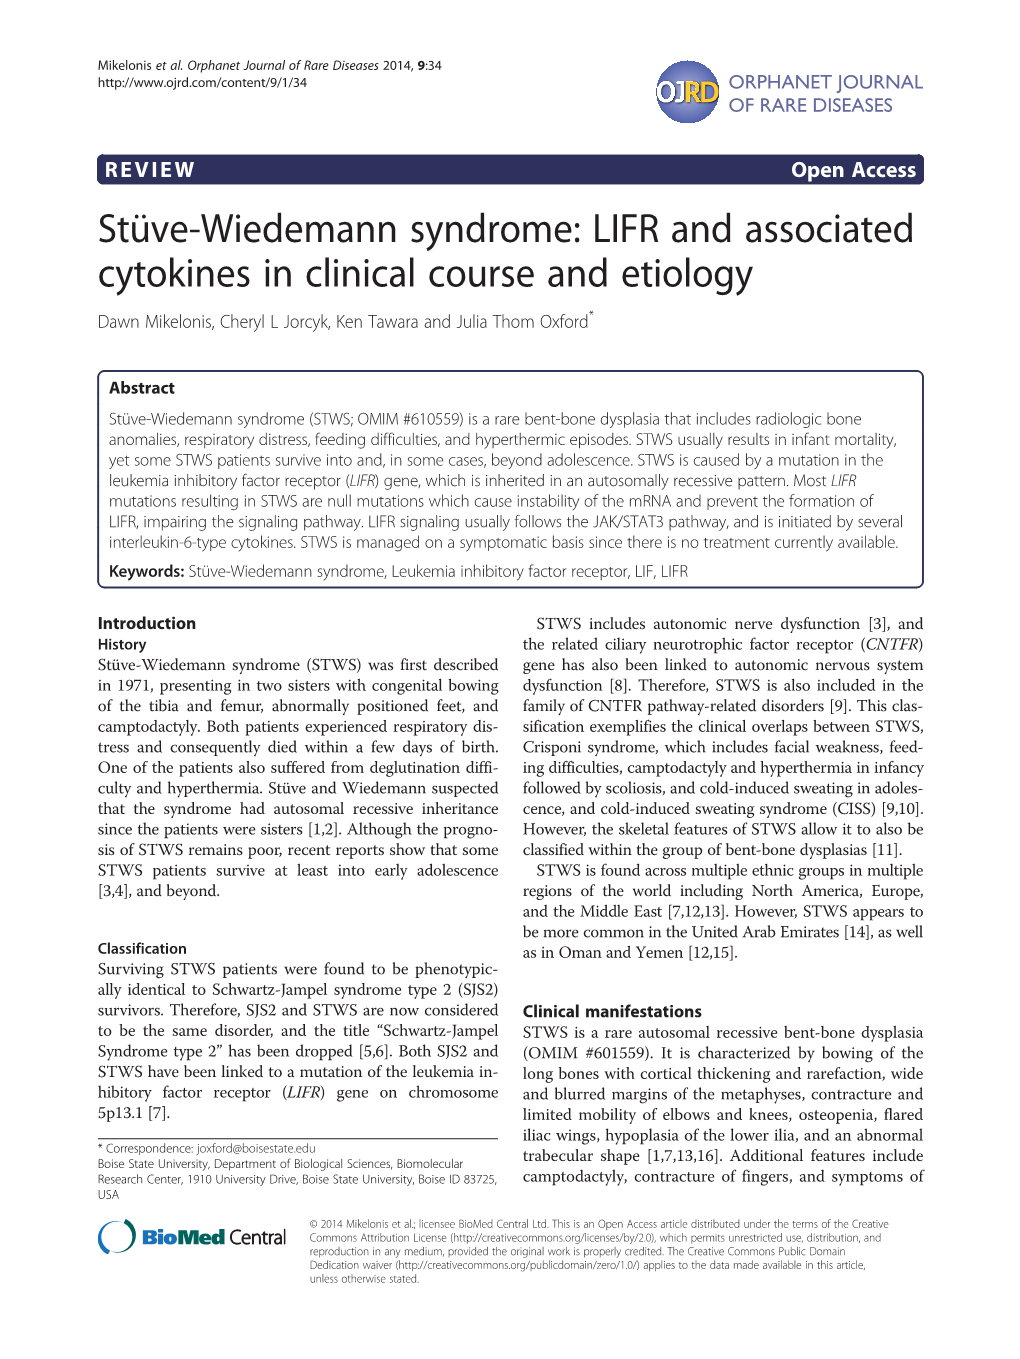 Stüve-Wiedemann Syndrome: LIFR and Associated Cytokines in Clinical Course and Etiology Dawn Mikelonis, Cheryl L Jorcyk, Ken Tawara and Julia Thom Oxford*